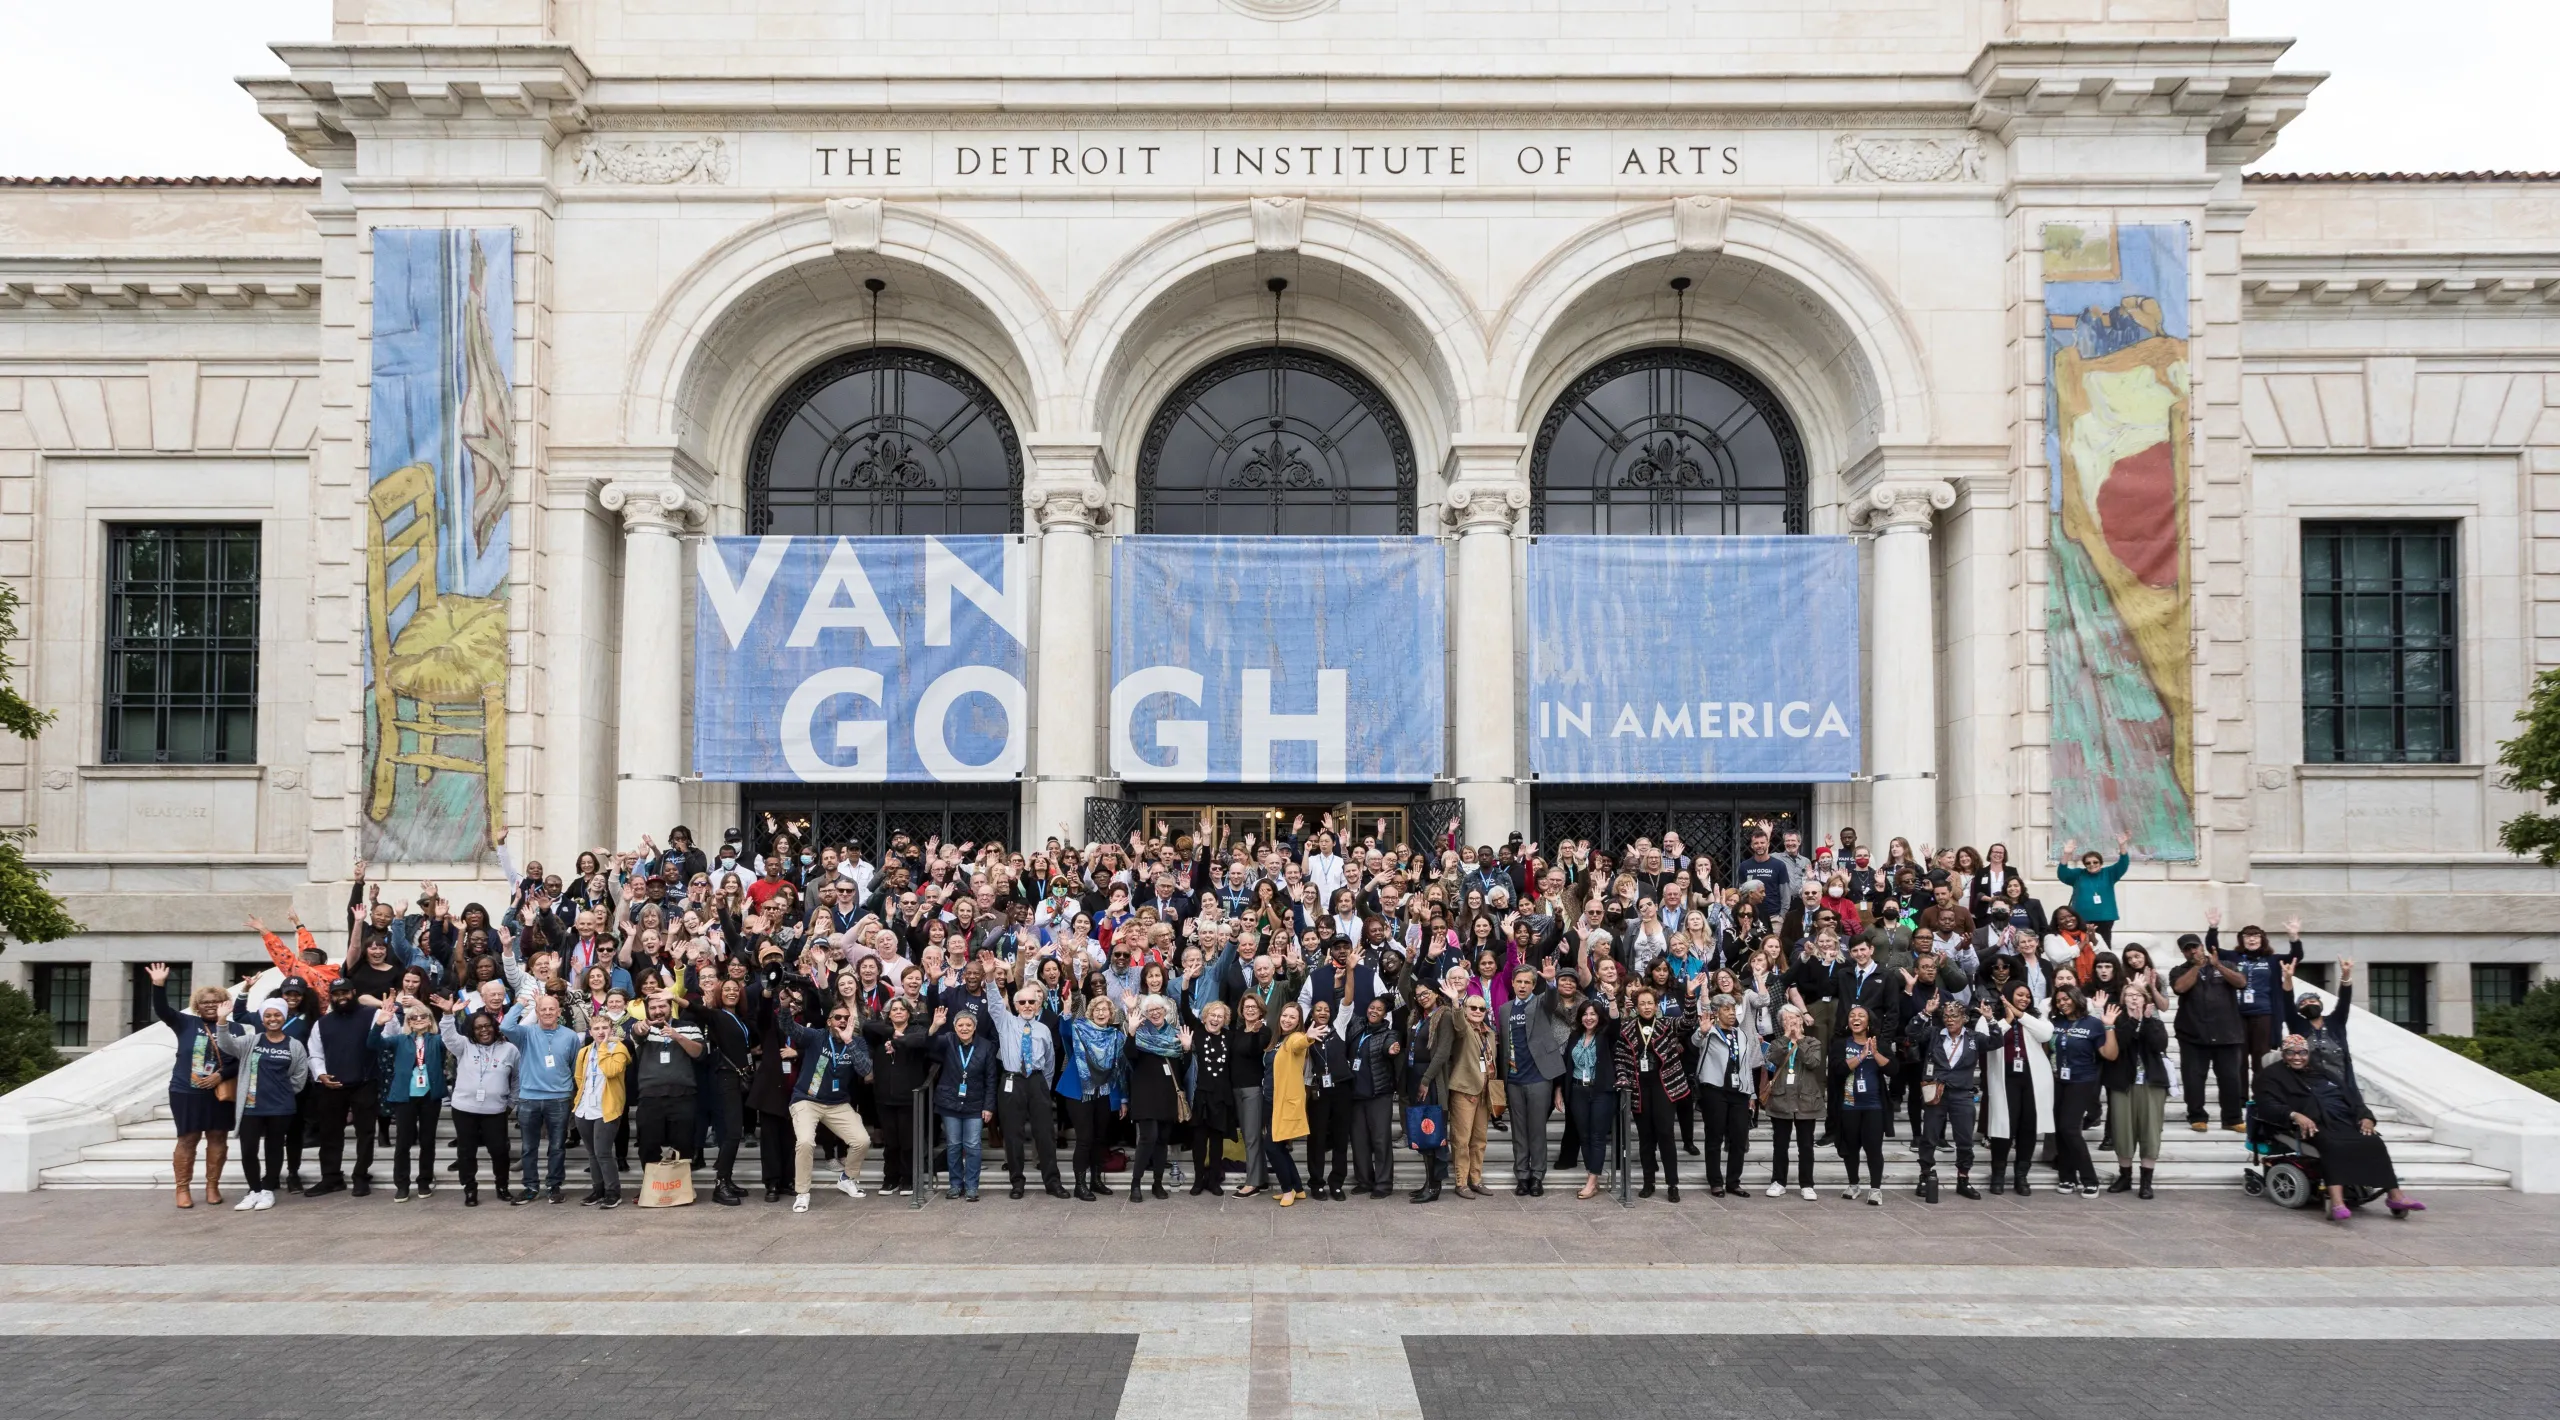 Detroit Institute of Arts staff pose together on the front steps of the museum under a banner that reads "Van Gogh in America."